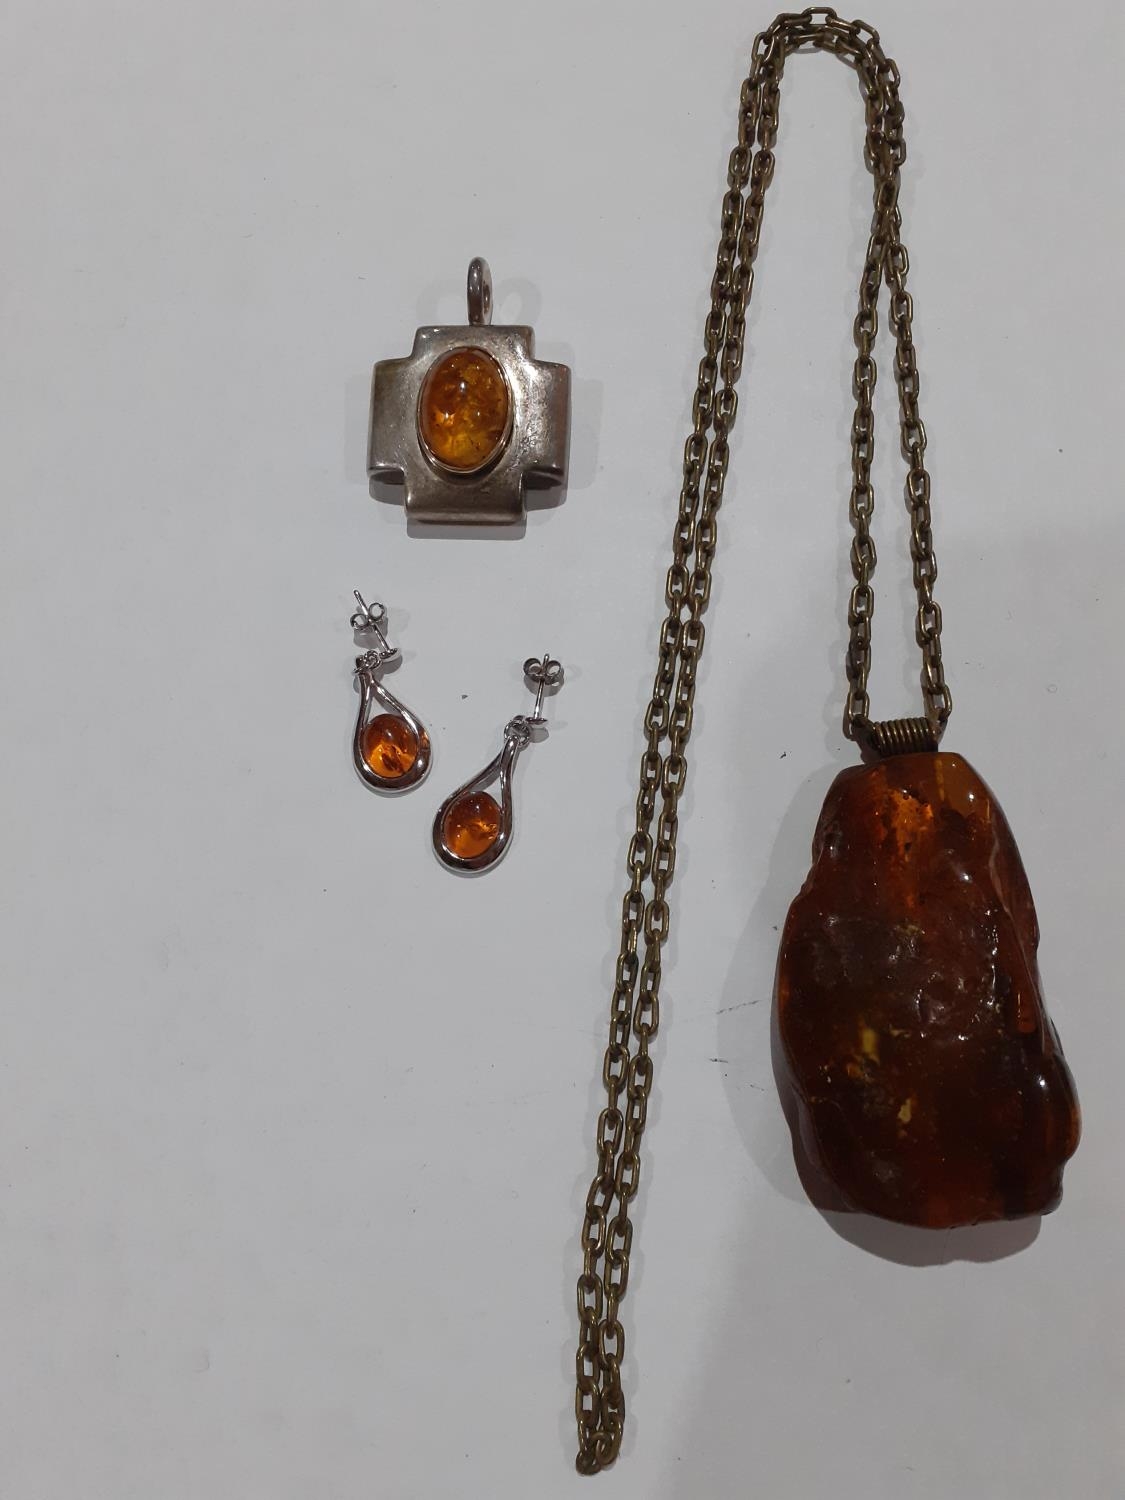 A small quantity of amber and amber effect costume jewellery.